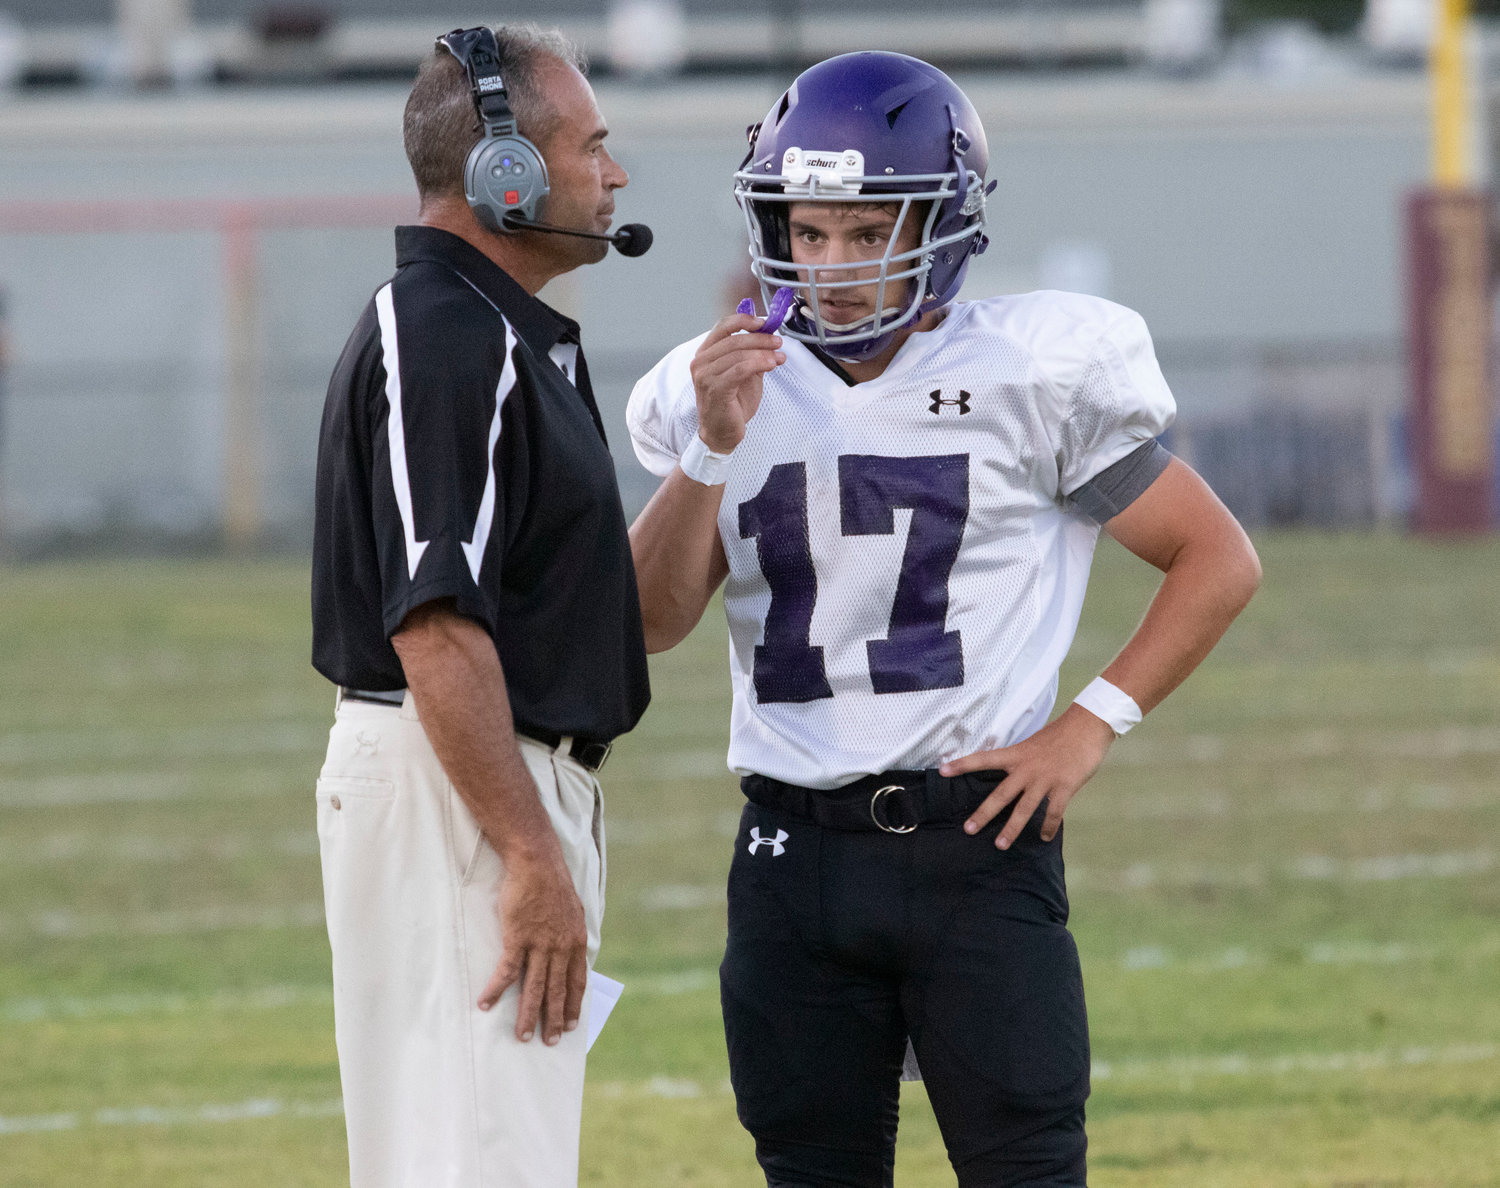 Head coach Thomas DelSanto Jr. speaks to quarterback Riley Howland between plays in the first half.